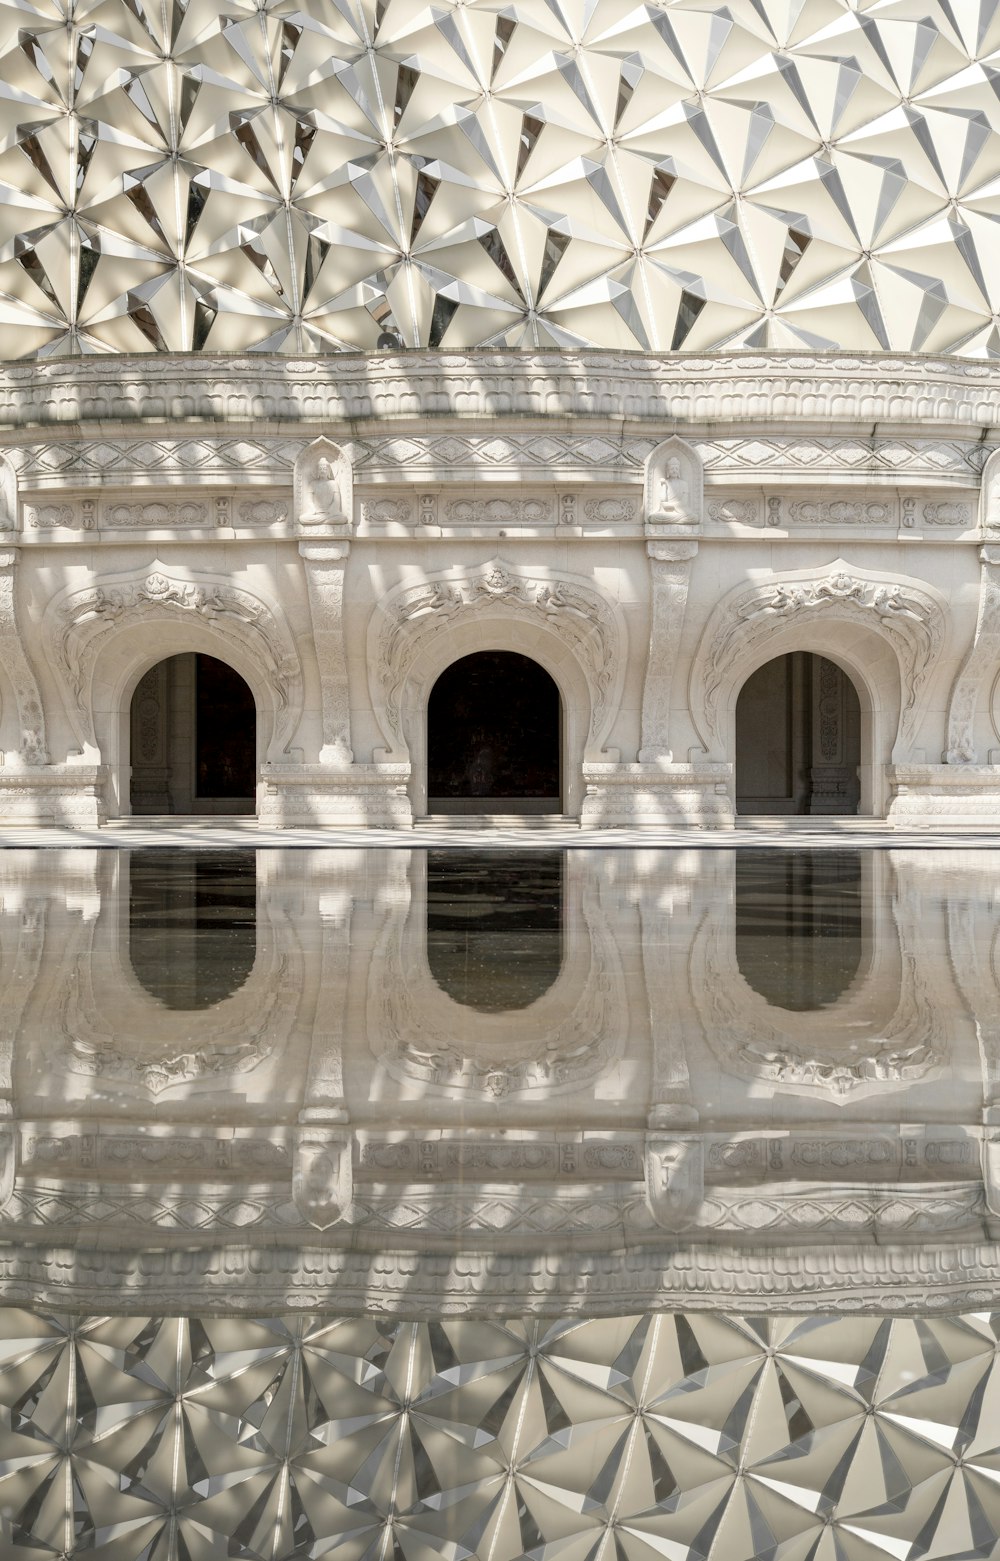 a reflection of a building in a pool of water